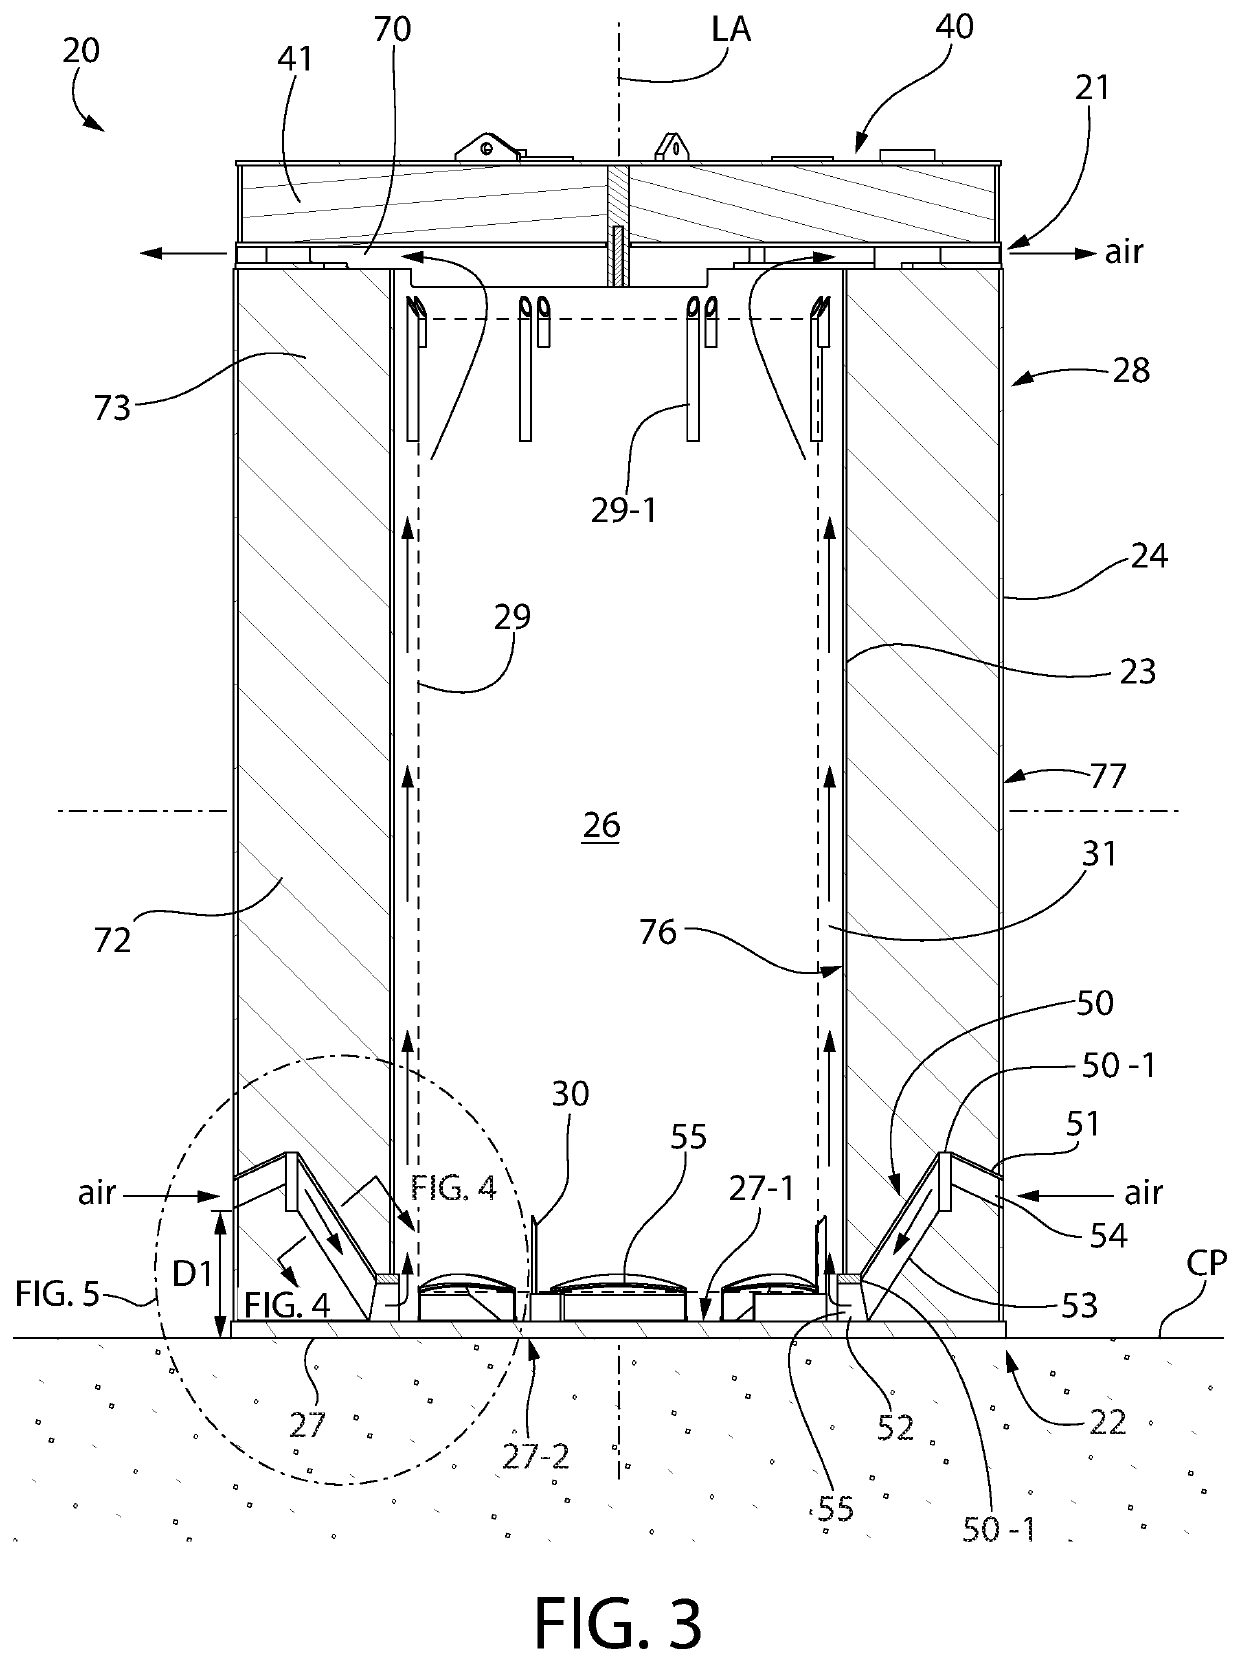 Flood and wind-resistant ventilated module for spent nuclear fuel storage